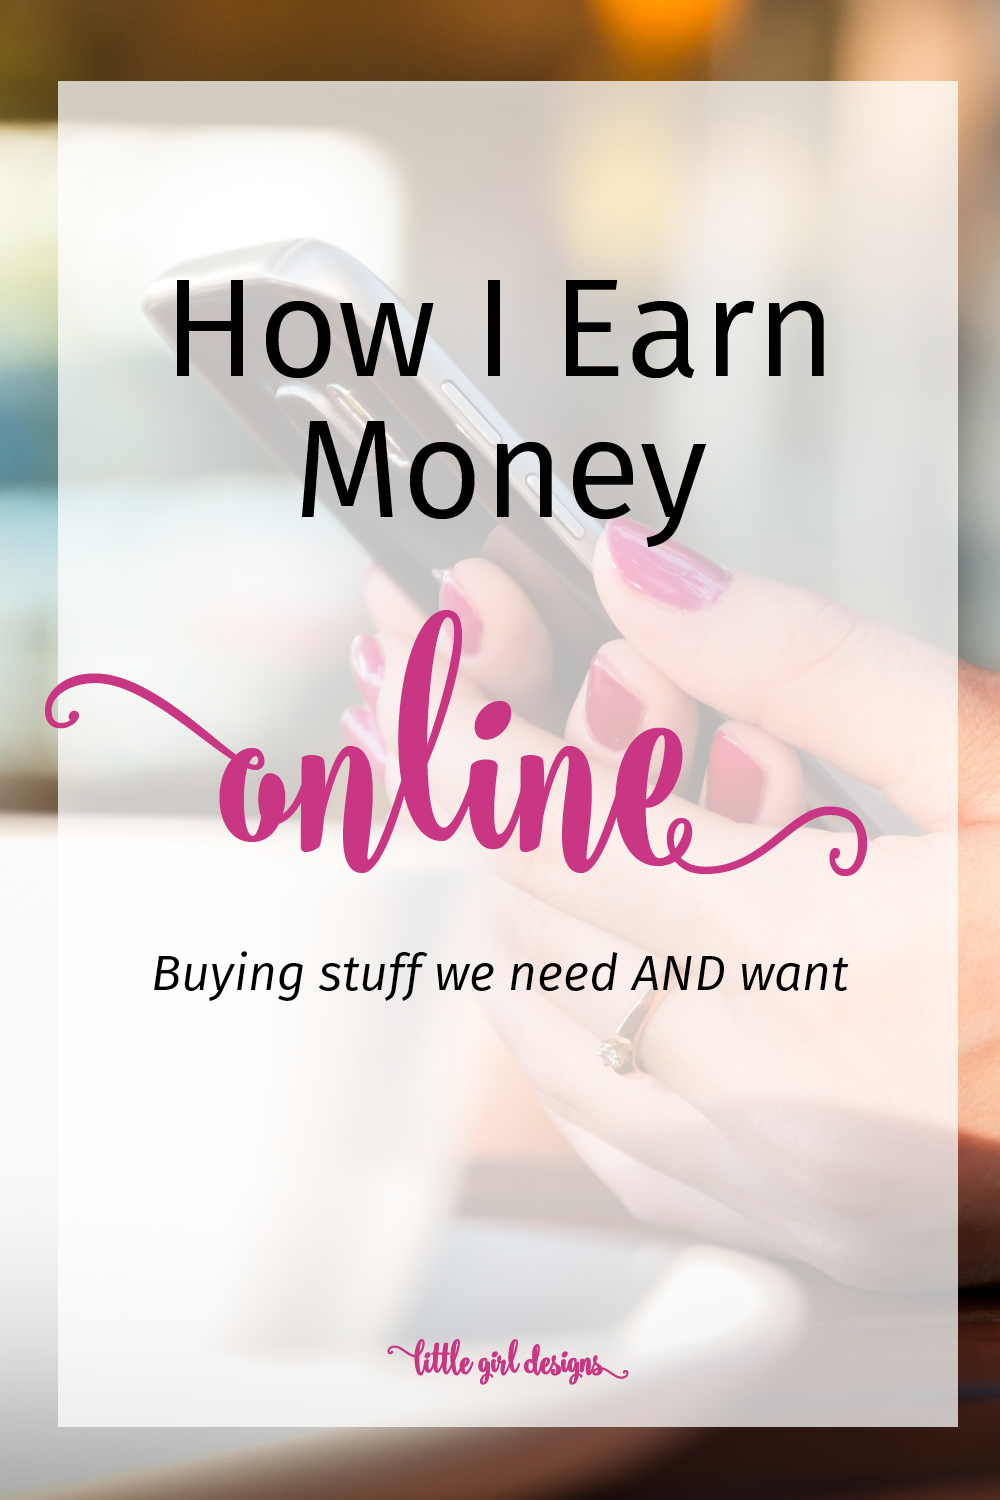 I love to shop online so this is perfect for me! I didn't realize I could actually earn money back by doing this.